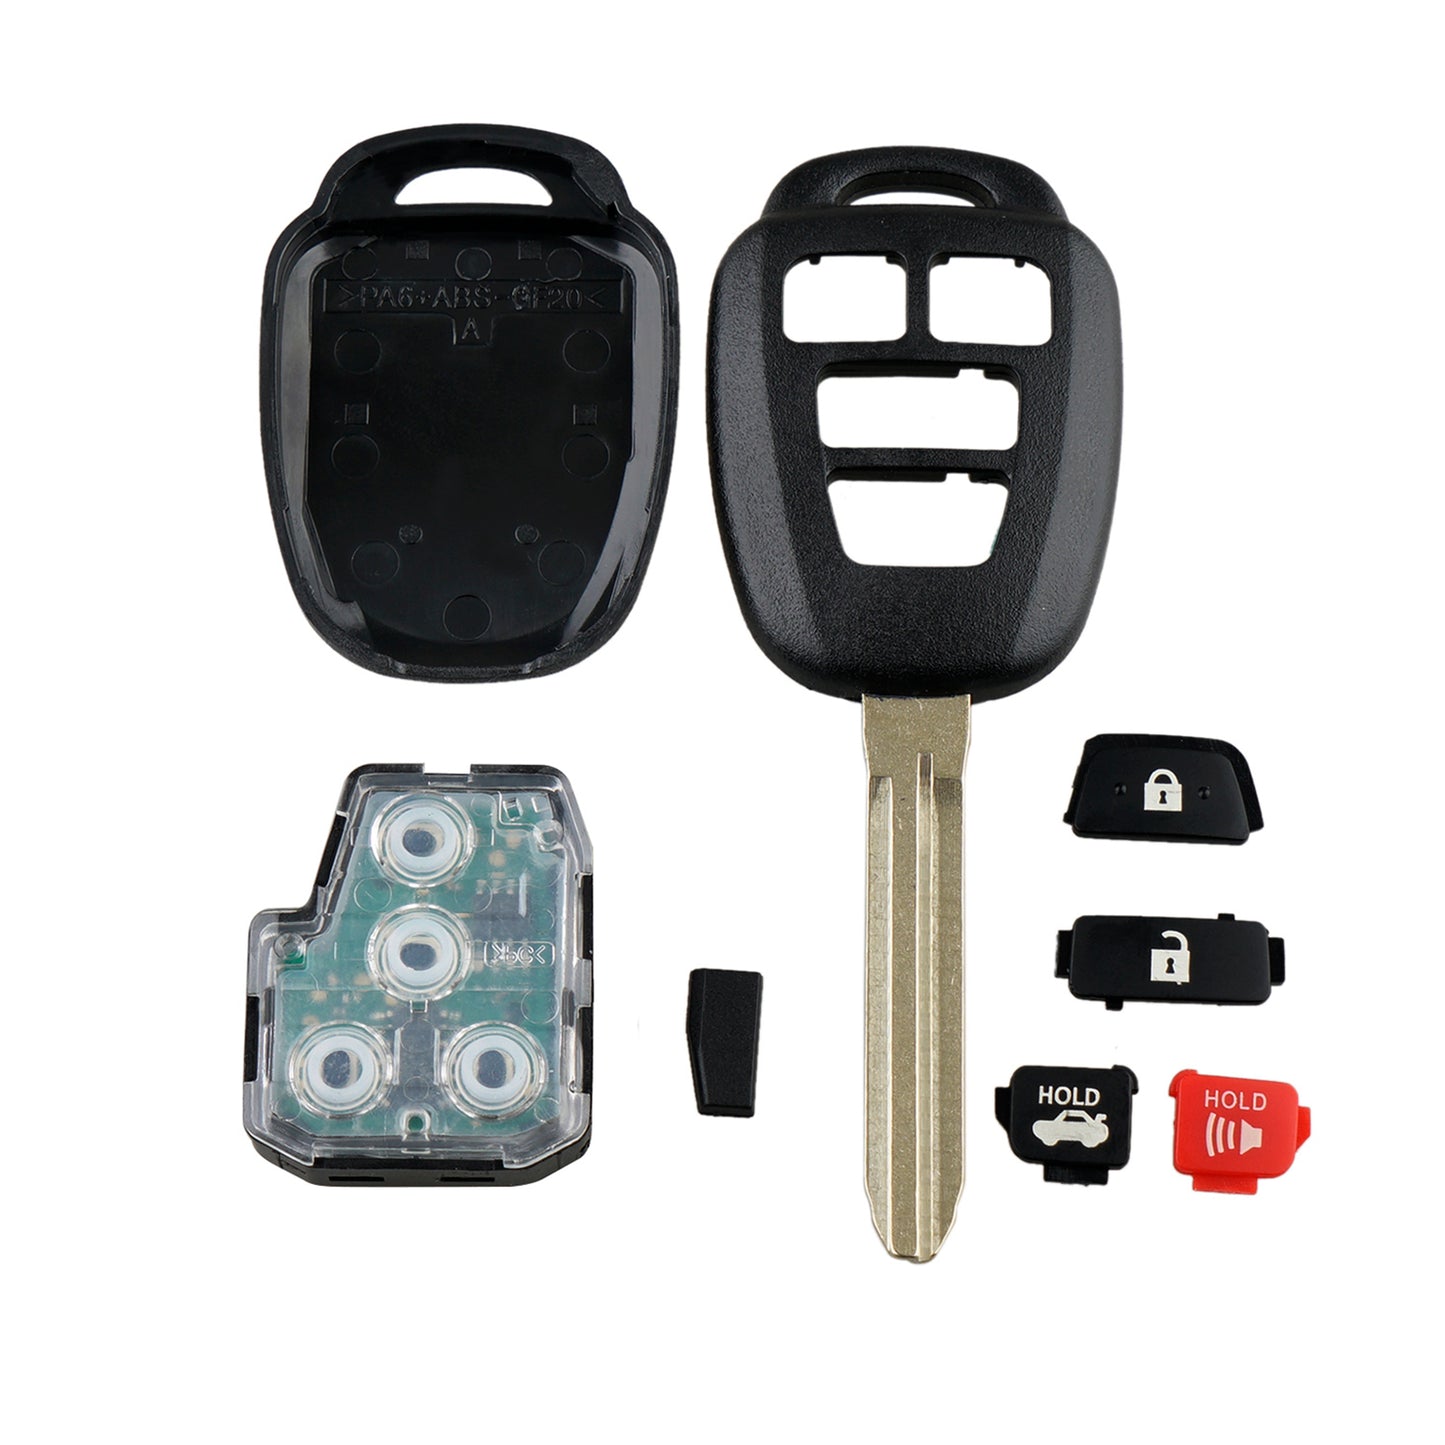 3+1 Buttons 314.4MHz Keyless Entry Fob Remote Car Key For 2014 - 2019 Toyota Corolla Canadian Production Camry FCC ID : HYQ12BDM / HYQ12BEL SKU : J067